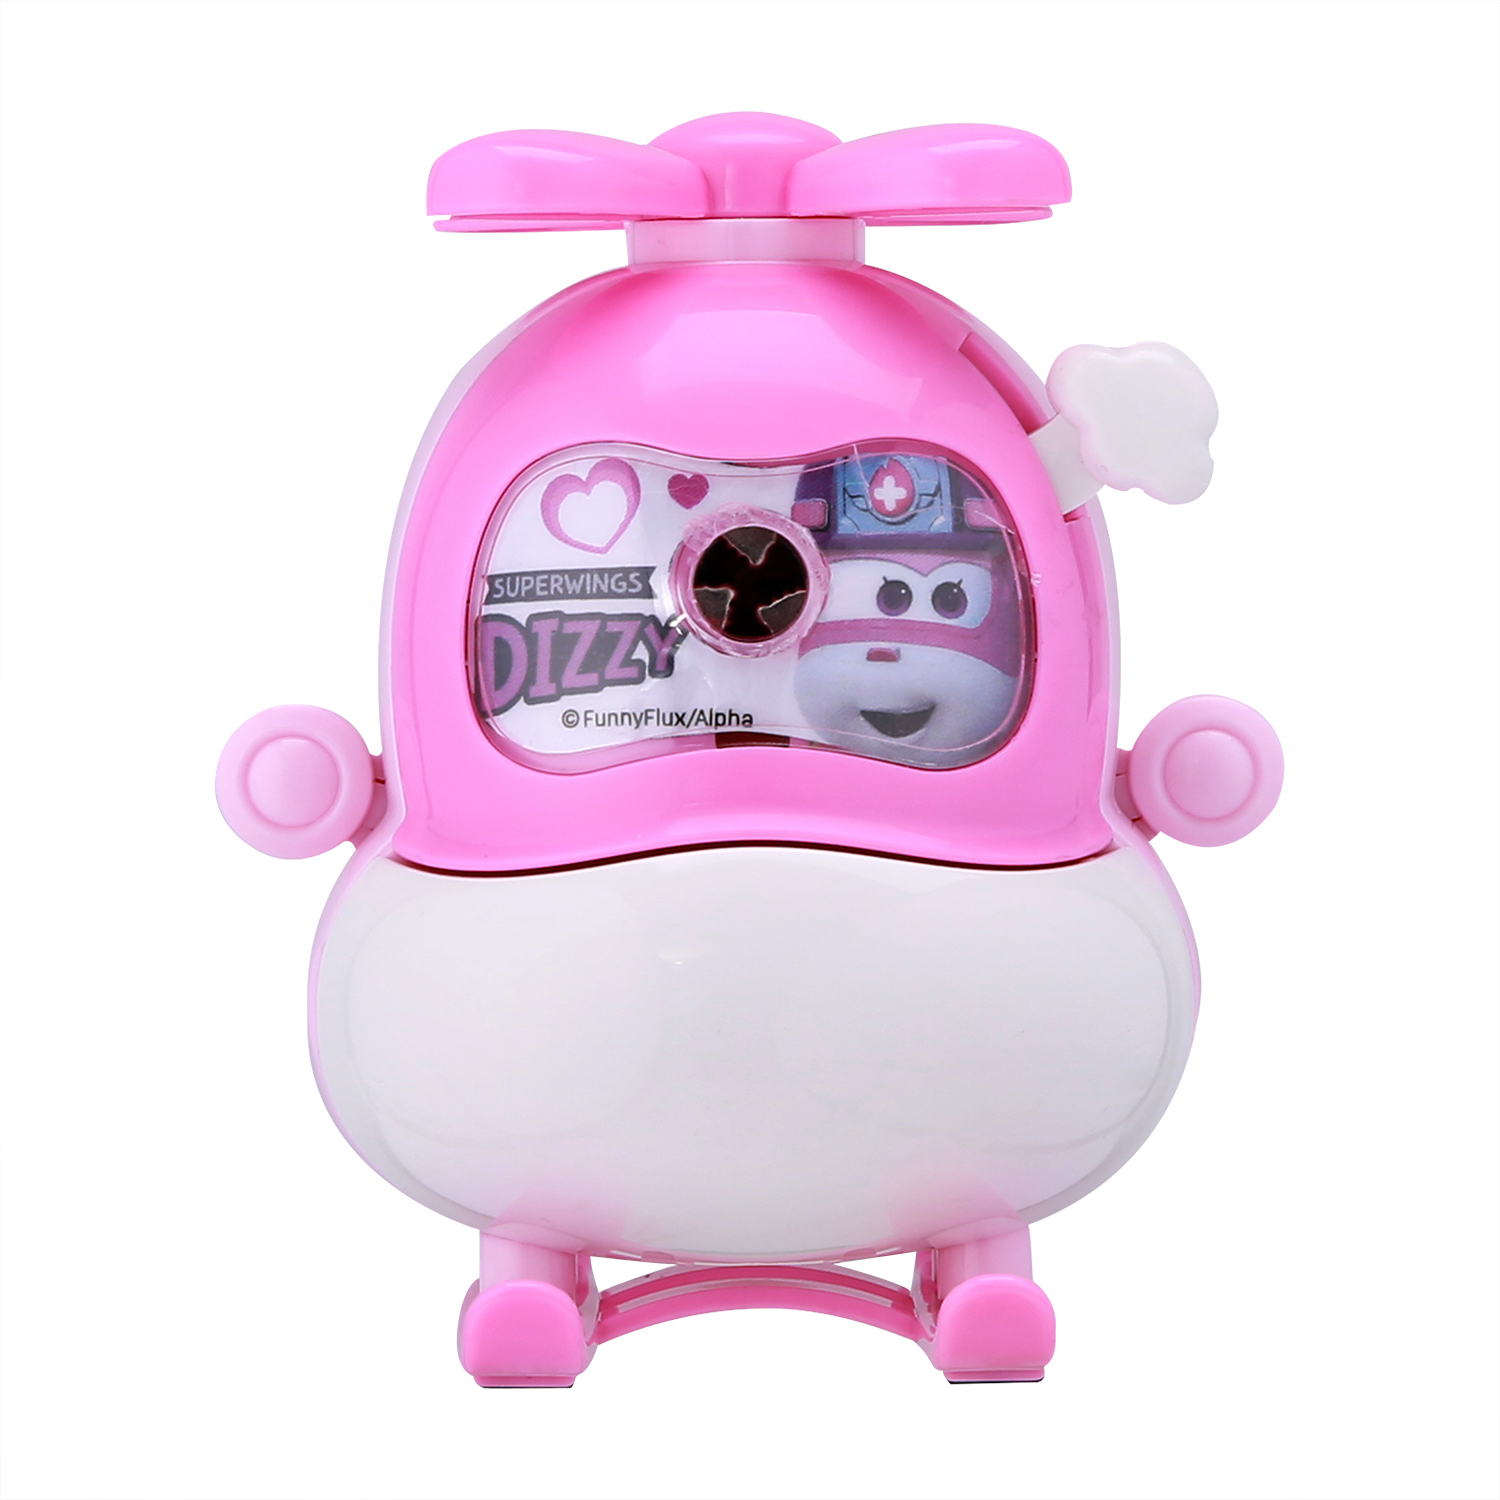 DELI ER10904 Rotary Pencil Sharpener Helicopter cute sharpener color fun gift stationery playful student school supply